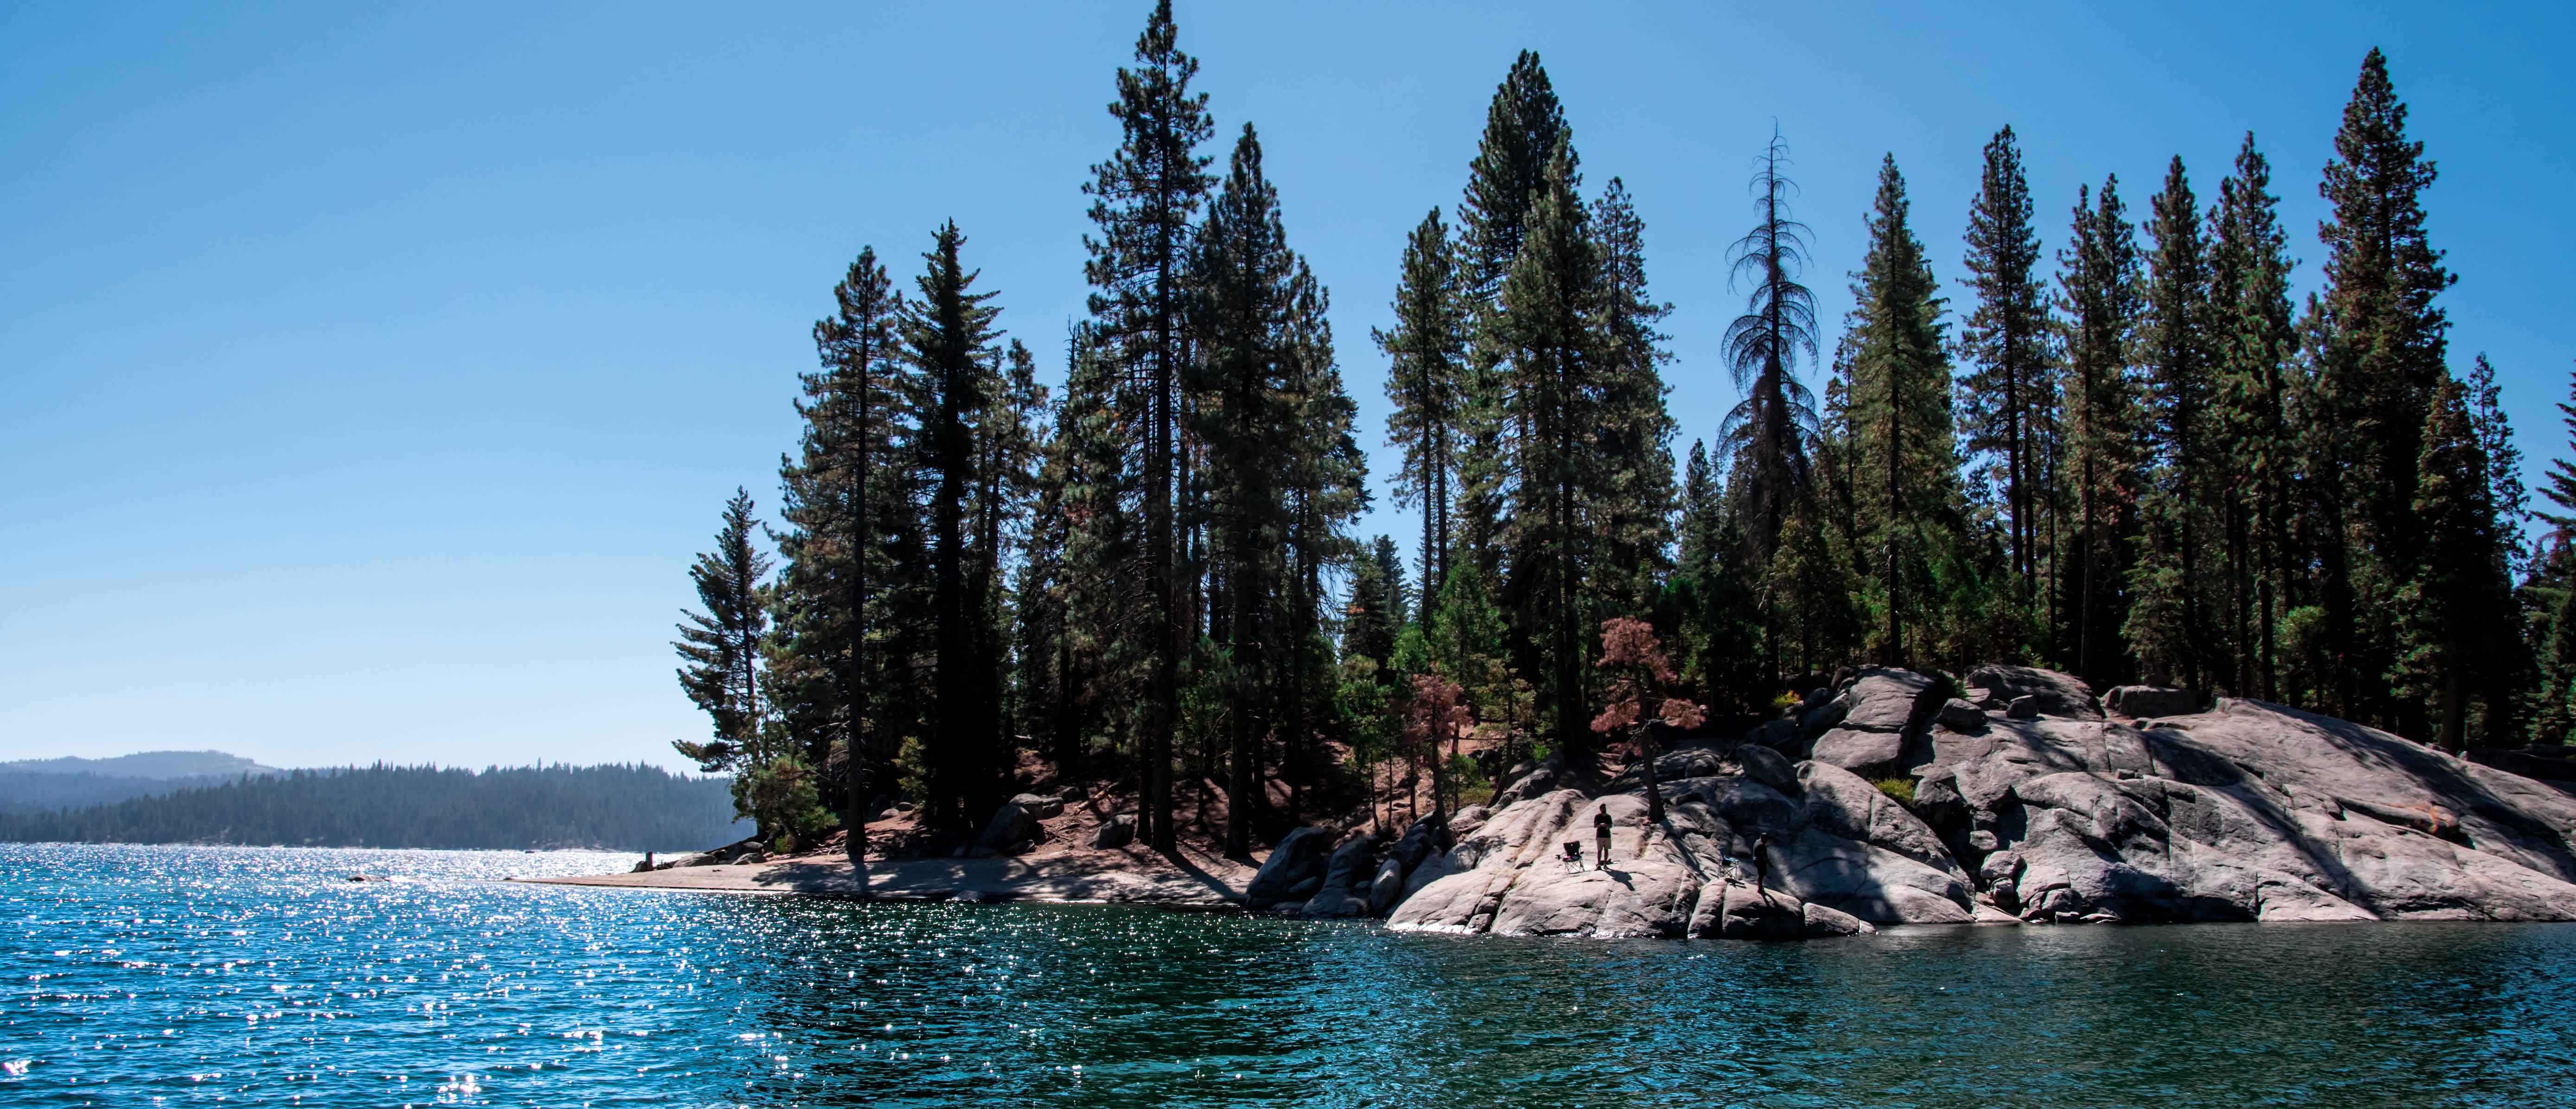 Large body of lake water surrounded by rock formations and evergreen trees